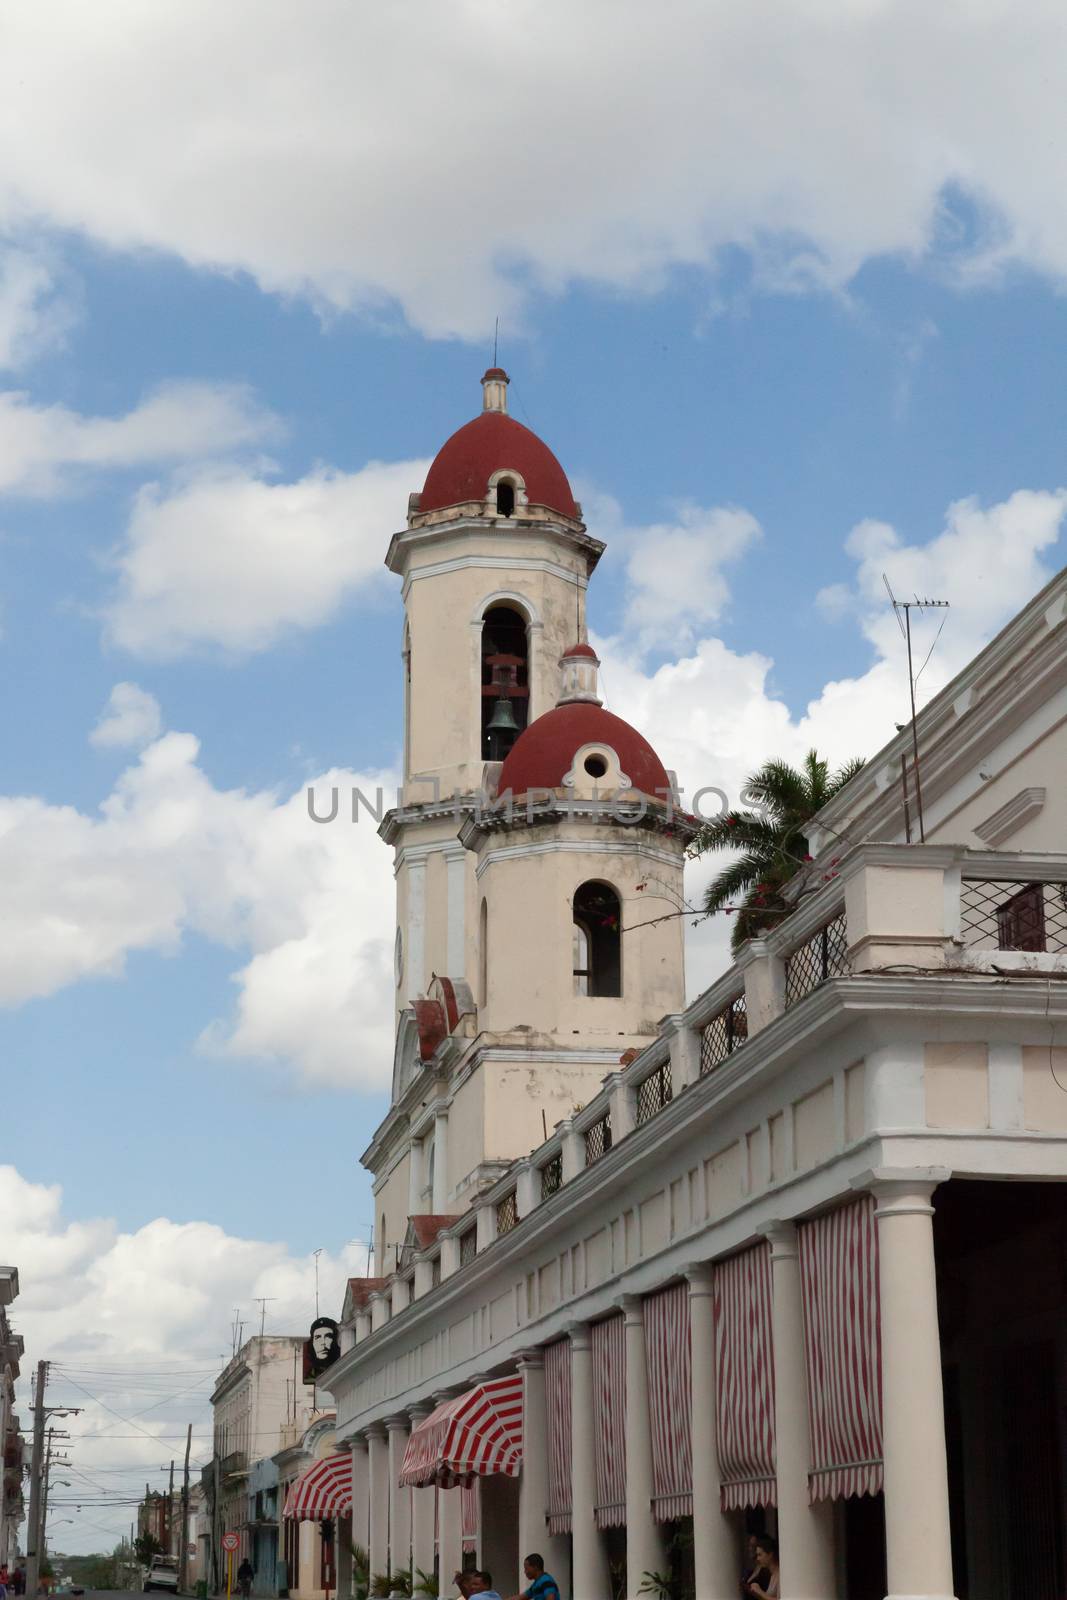 Cienfuegos, Cuba - 1 February 2015: Our Lady of the Immaculate Conception Cathedral